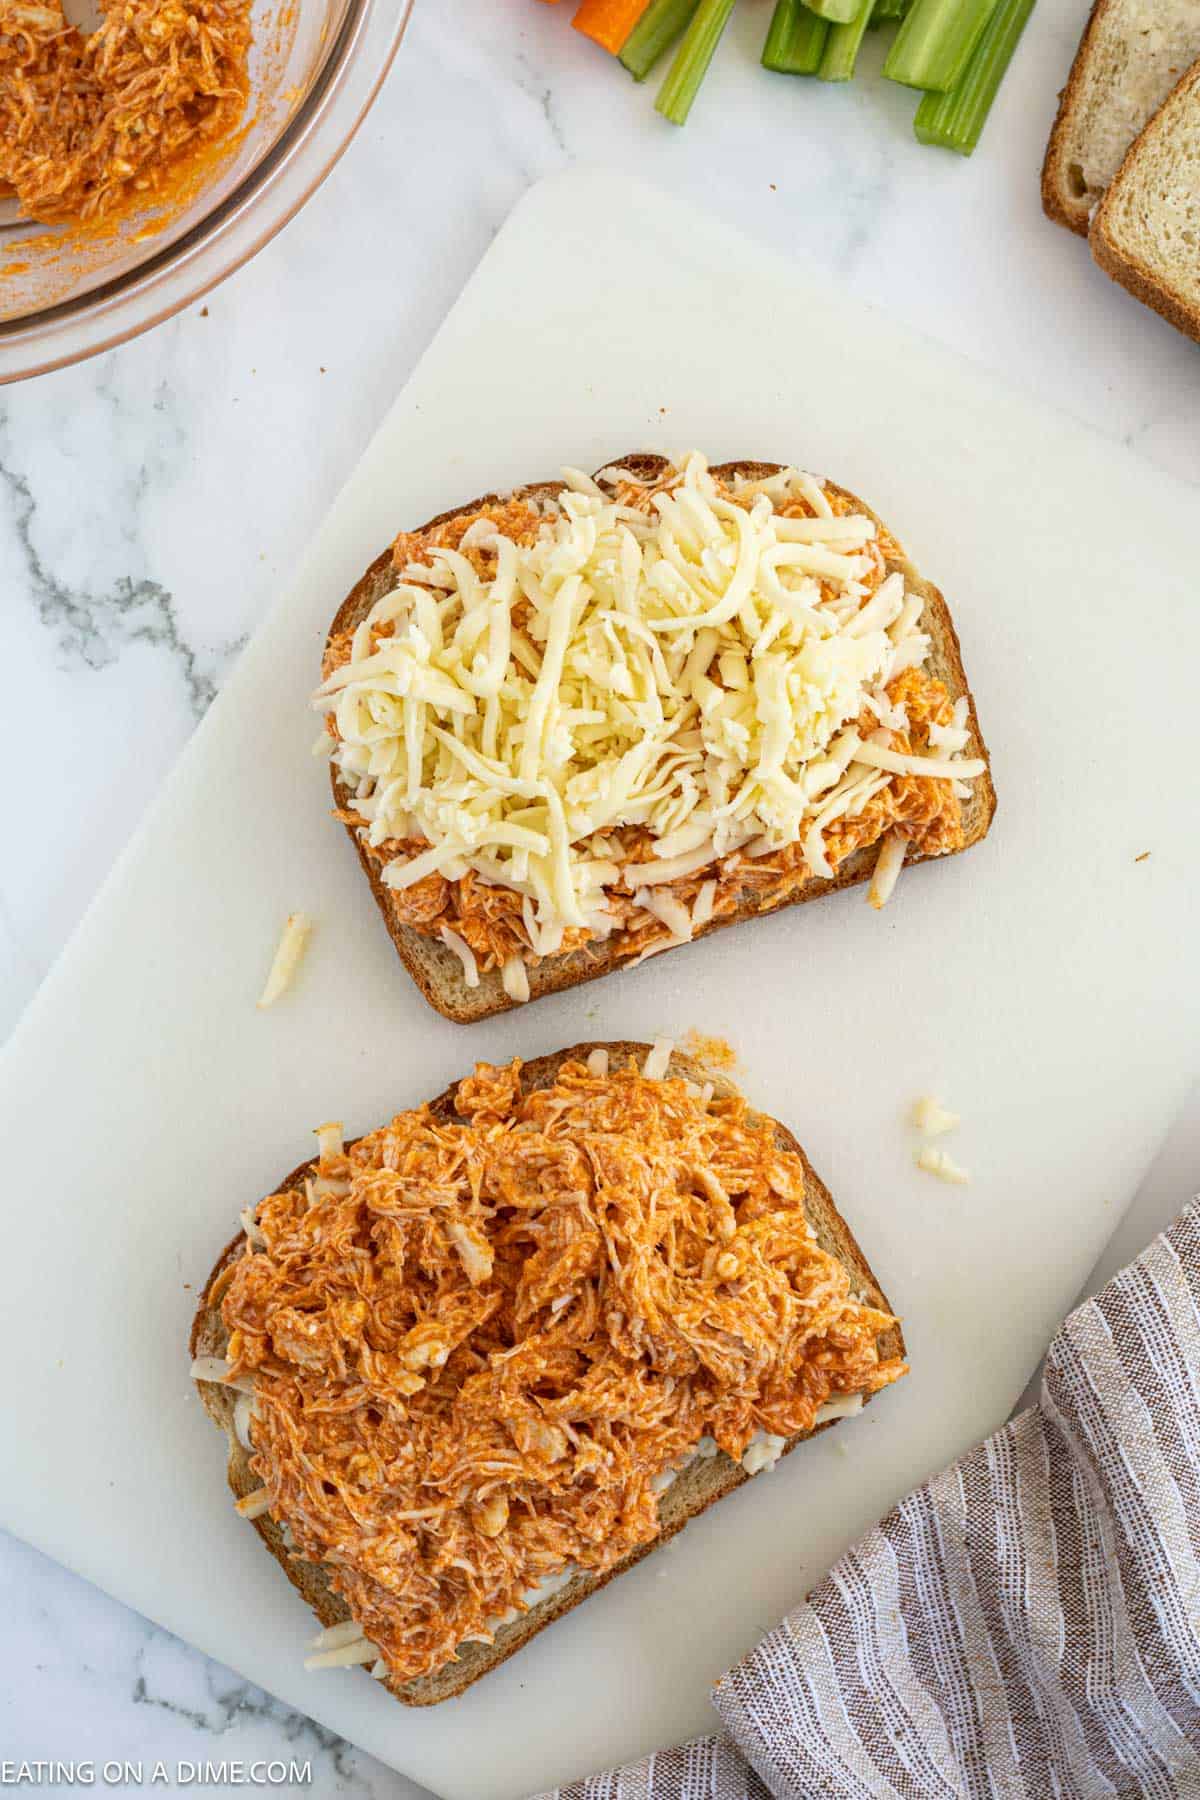 Topping bread with shredded buffalo chicken and shredded cheese